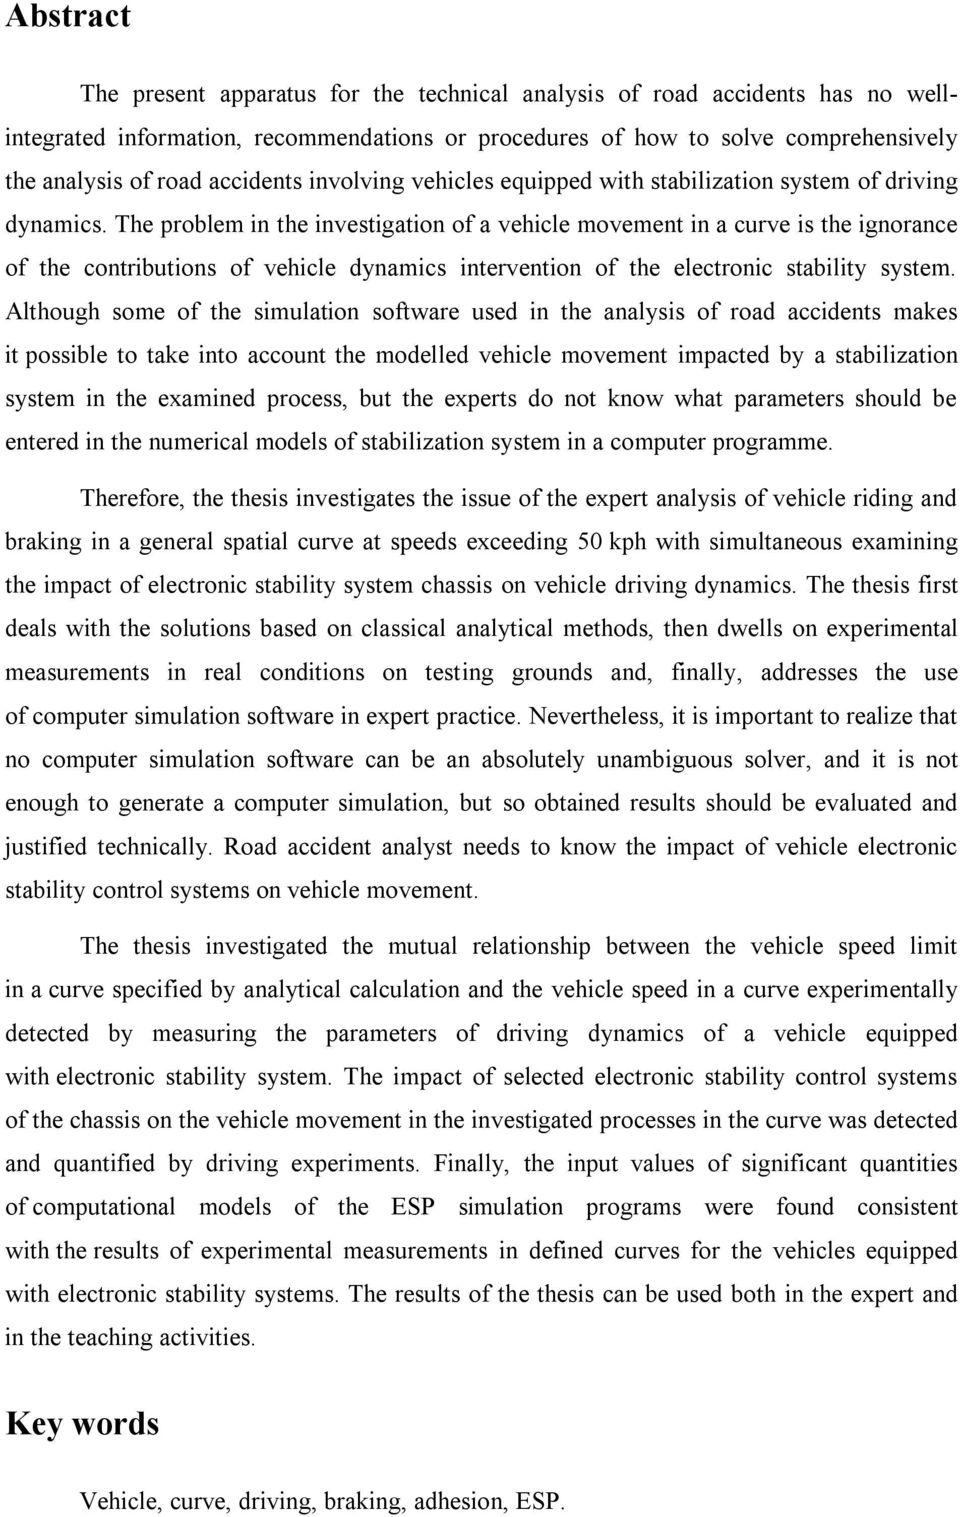 The problem in the investigation of a vehicle movement in a curve is the ignorance of the contributions of vehicle dynamics intervention of the electronic stability system.